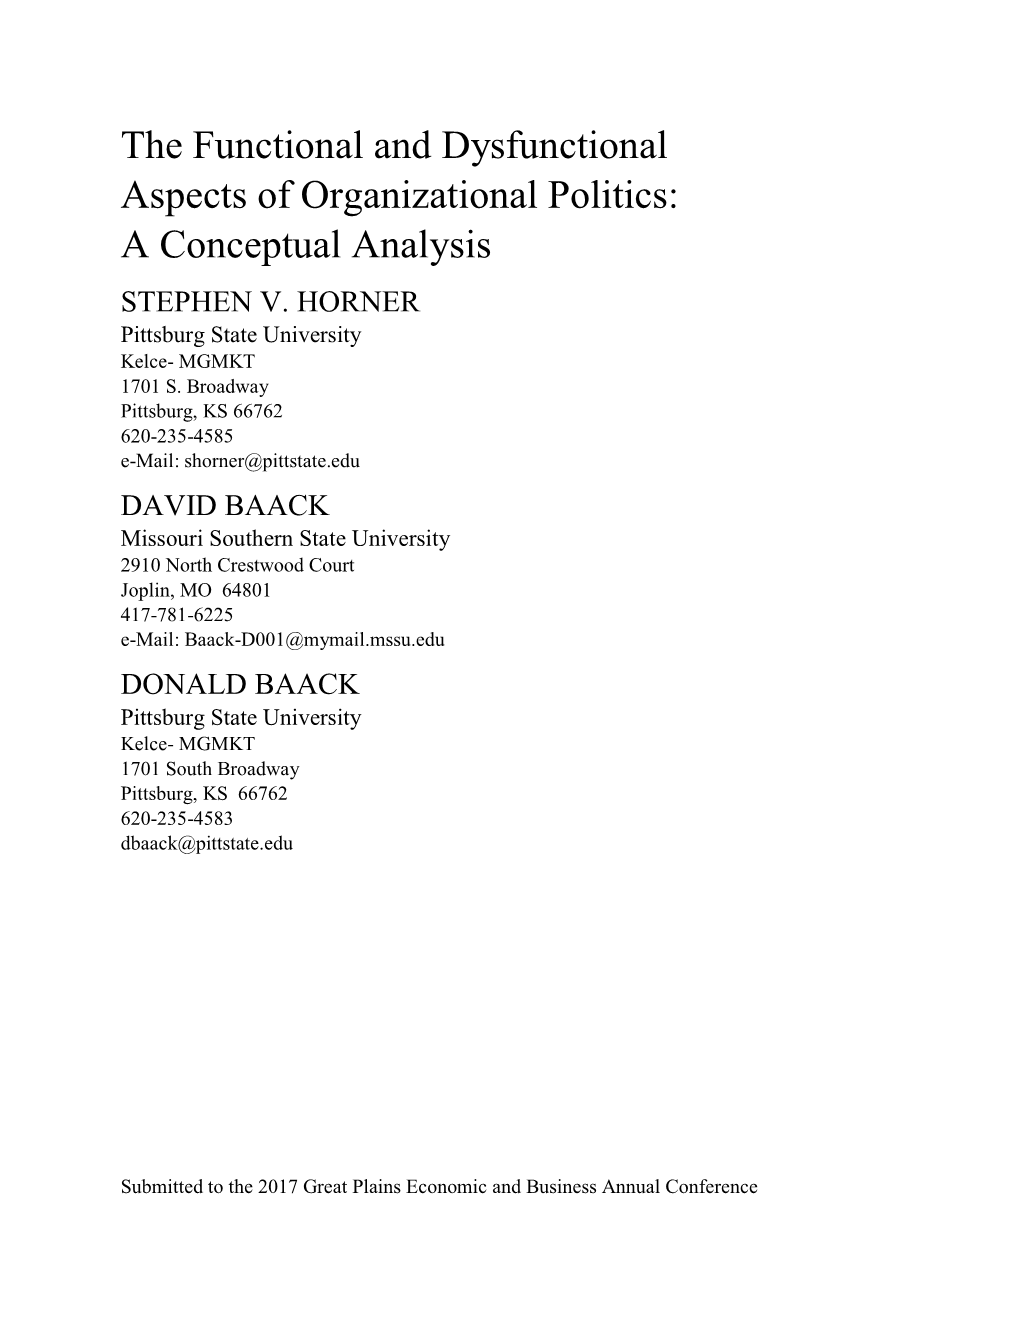 The Functional and Dysfunctional Aspects of Organizational Politics: a Conceptual Analysis